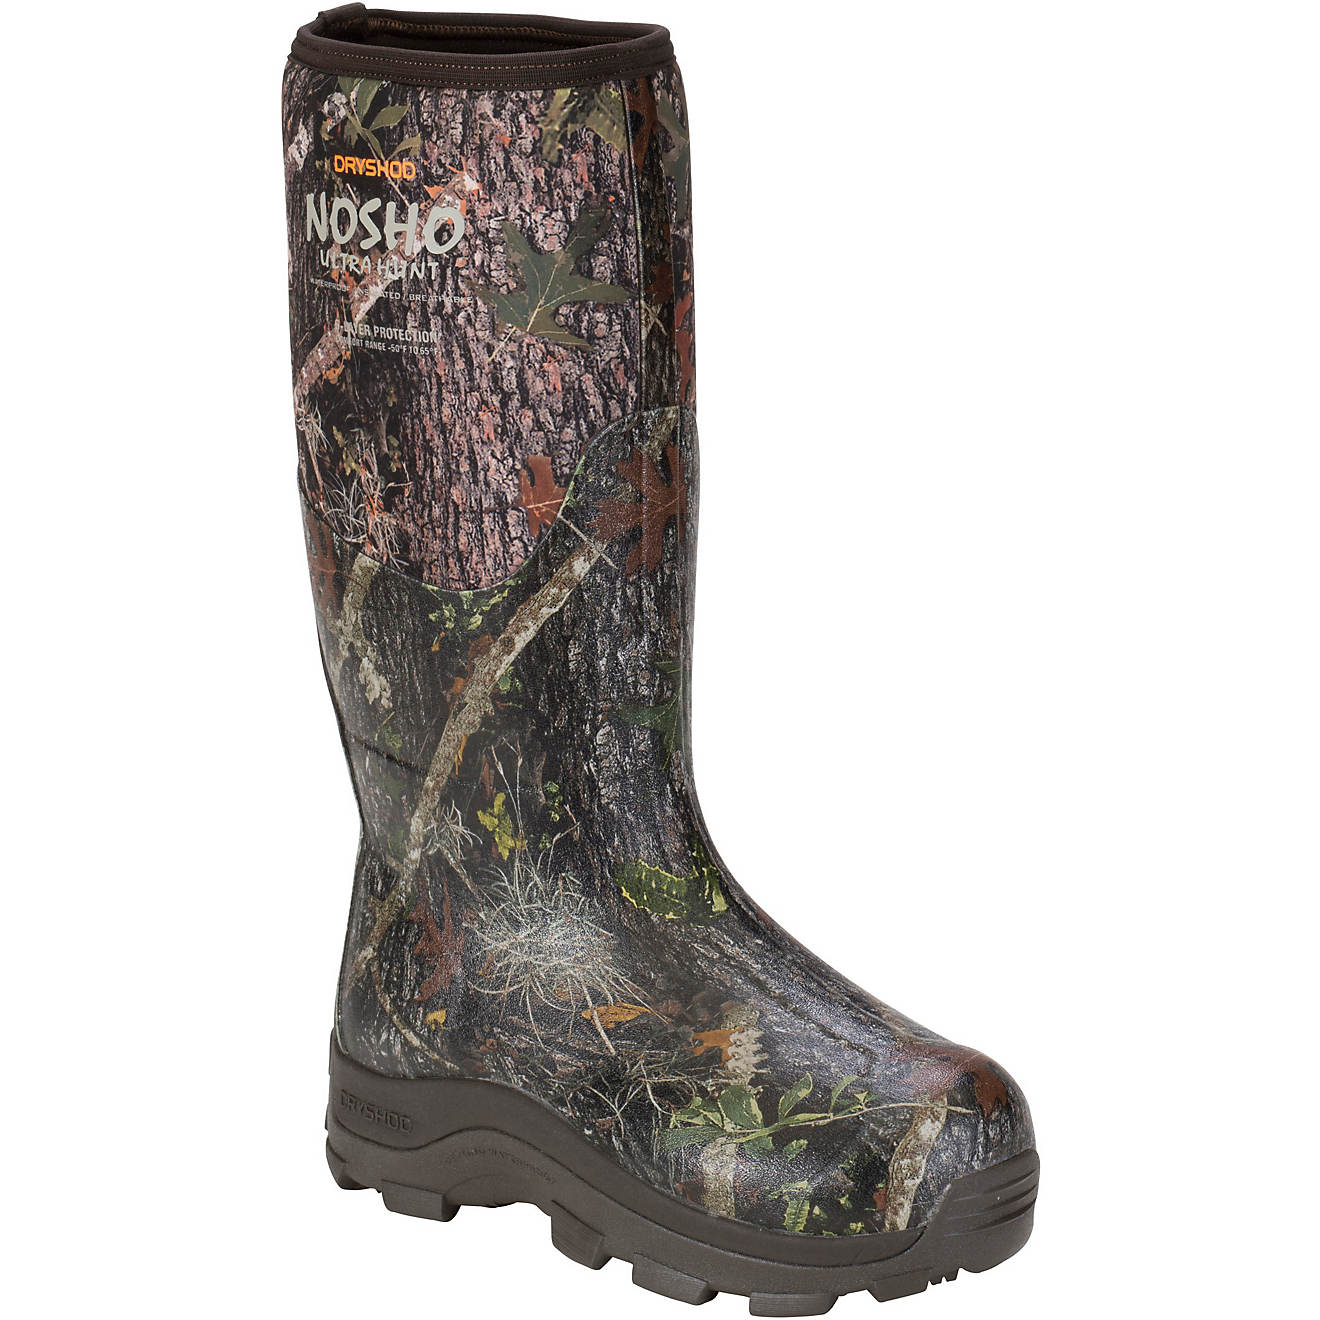 Dryshod Women's NOSHO Ultra Hunt Cold-Conditions Waterproof Hunting Boots                                                        - view number 1